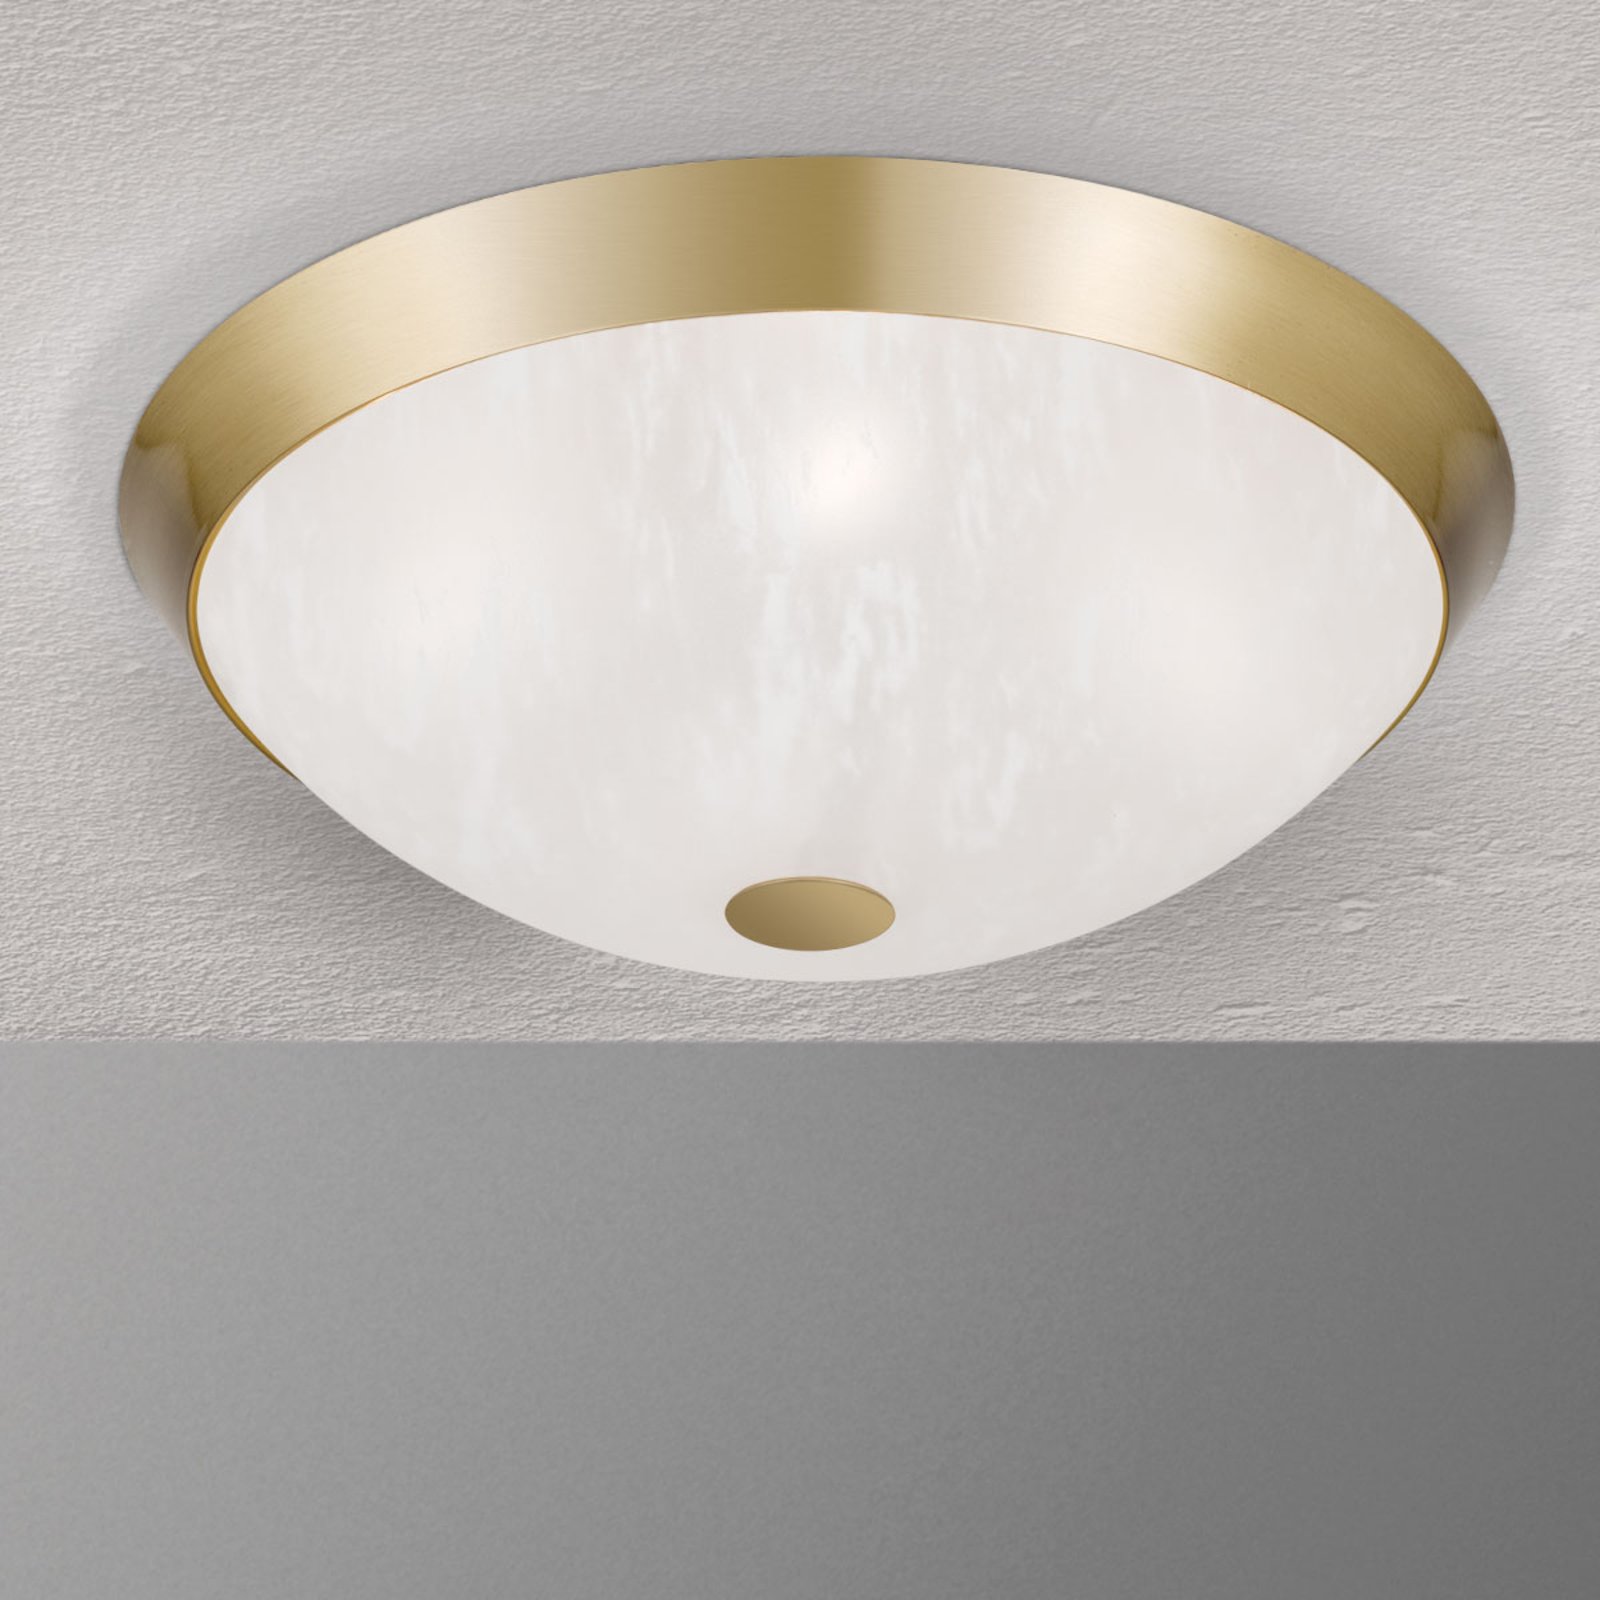 42 cm ceiling lamp Jaya with glass lampshade